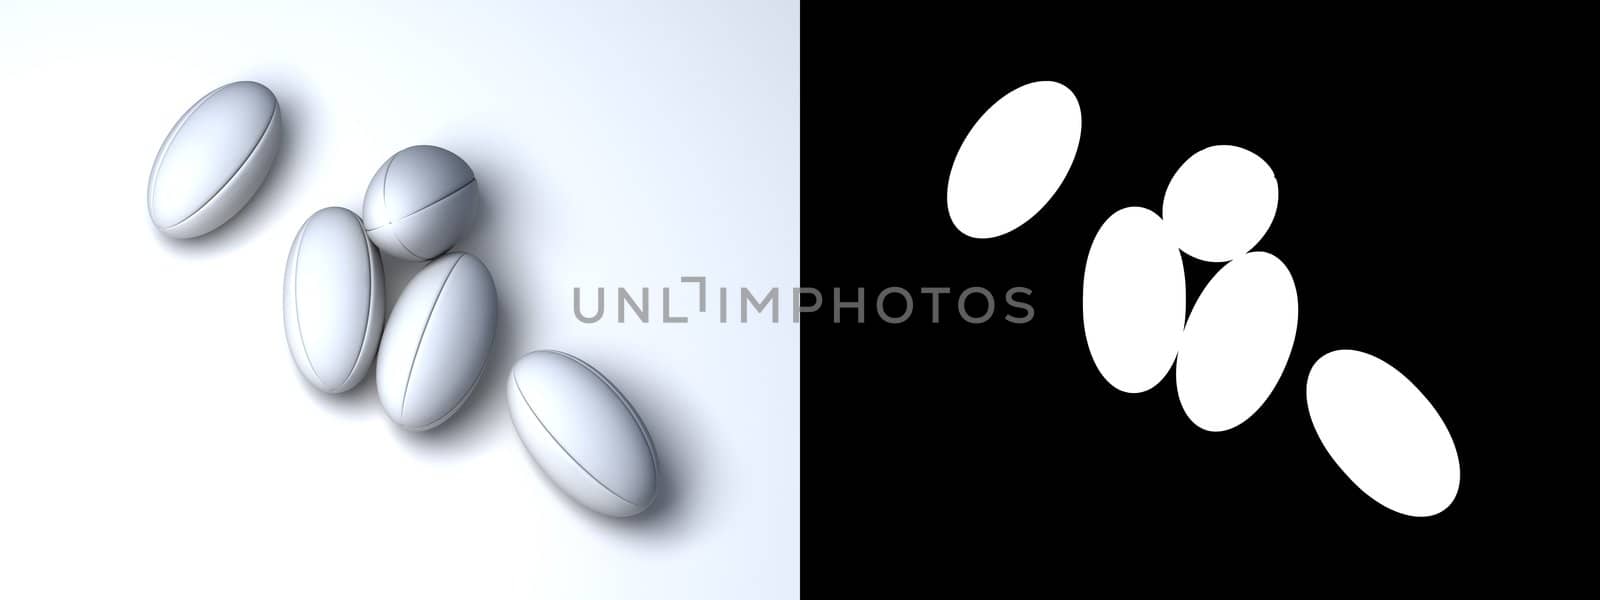  Five white rugby balls without any brand on a white background by shkyo30